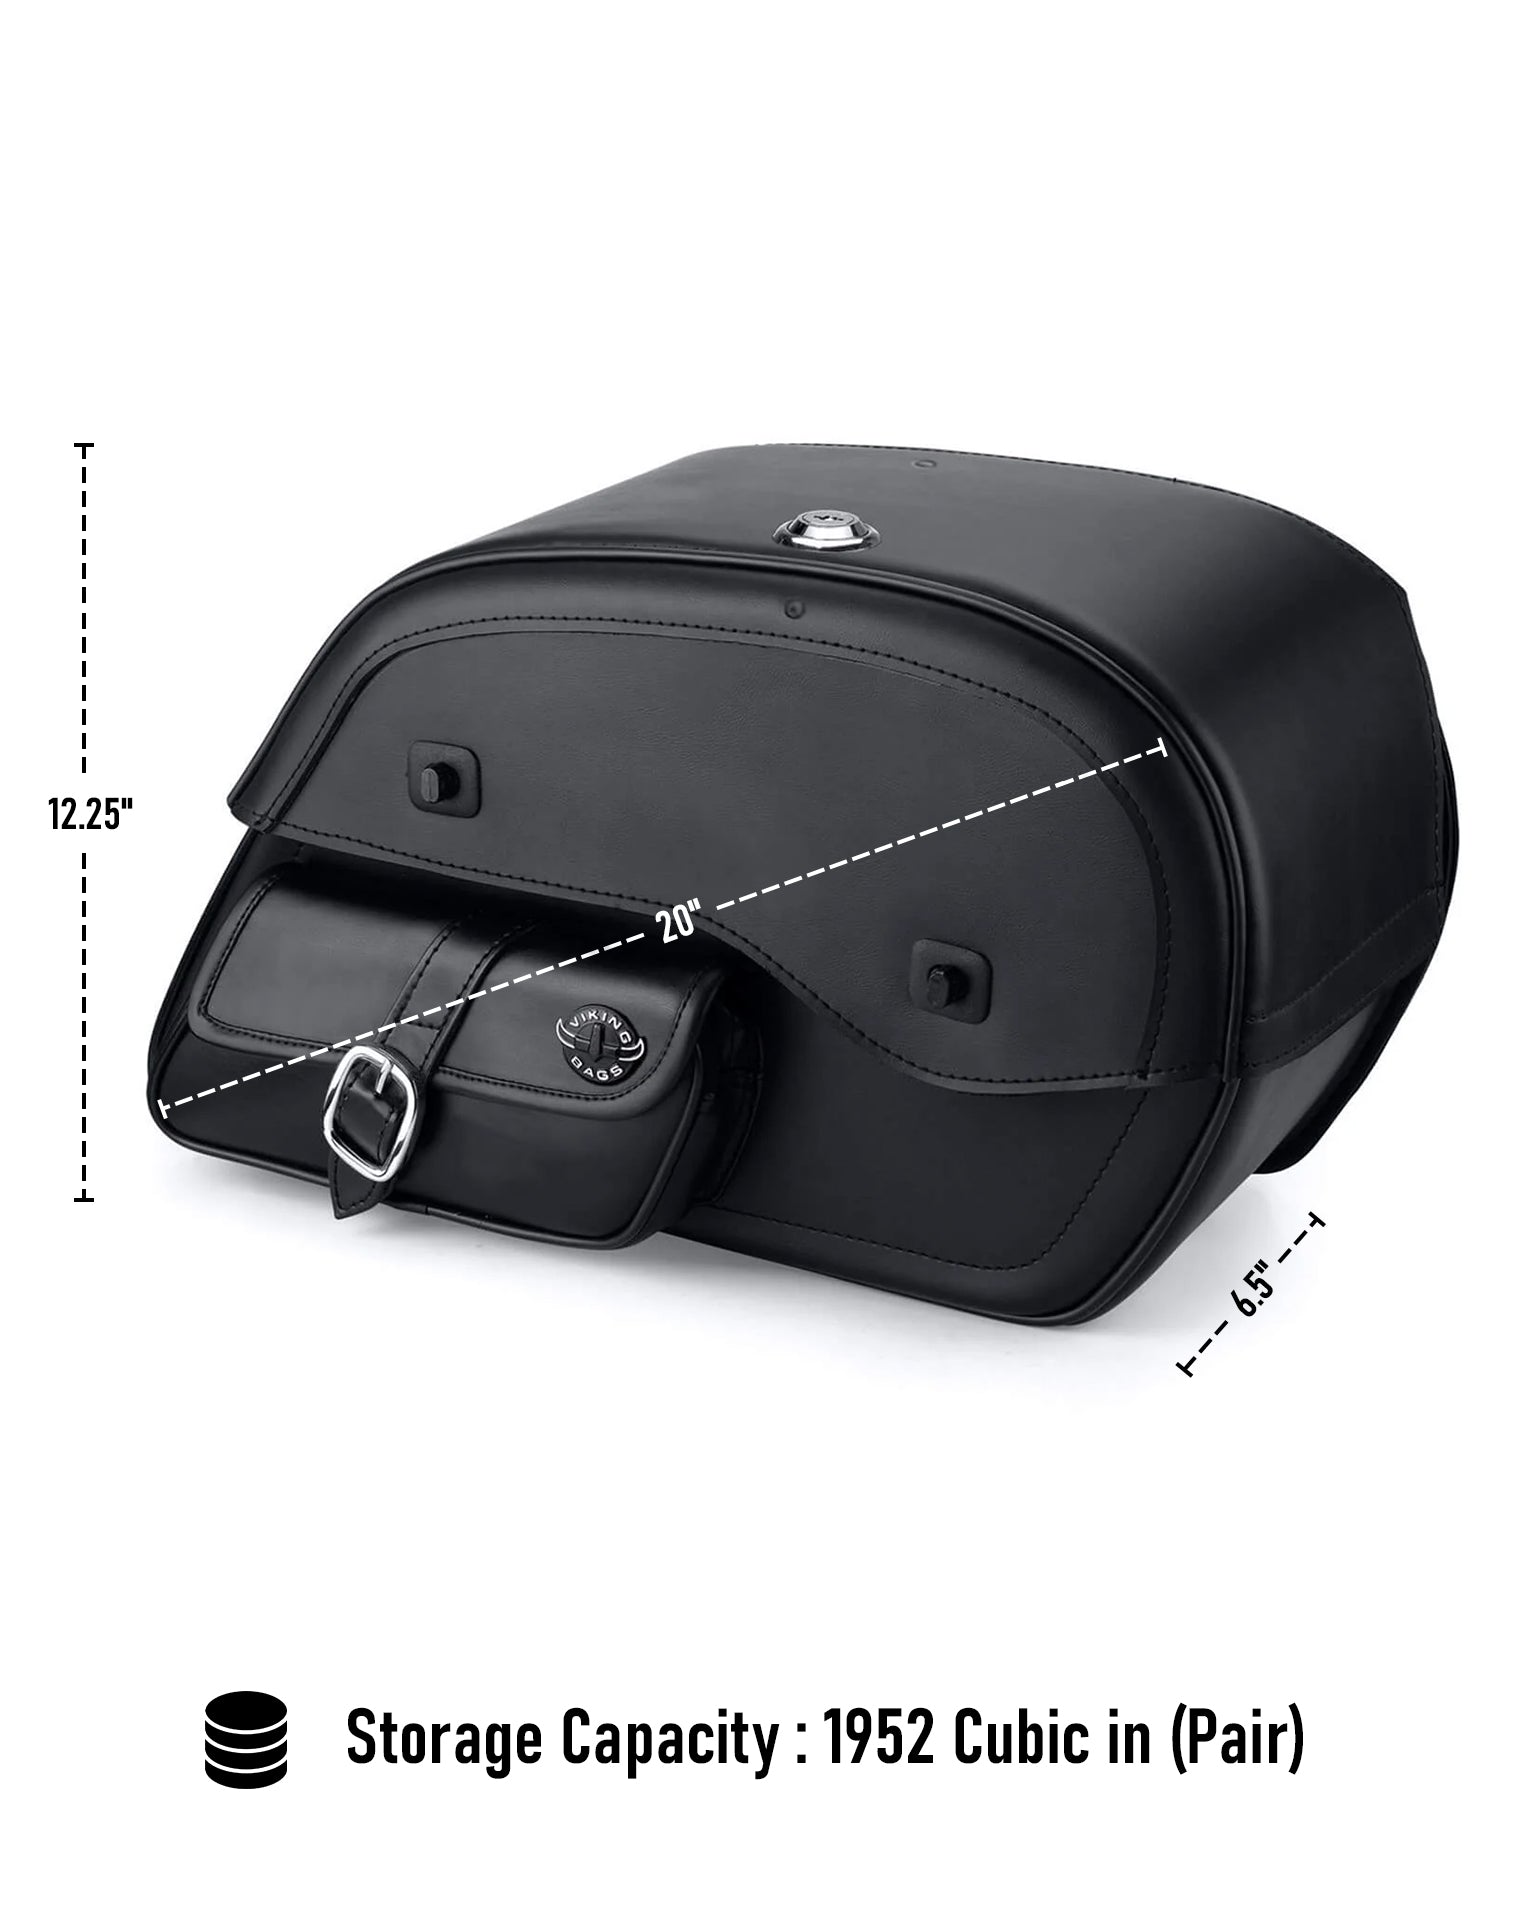 Viking Essential Side Pocket Large Yamaha Raider Leather Motorcycle Saddlebags Can Store Your Ridings Gears